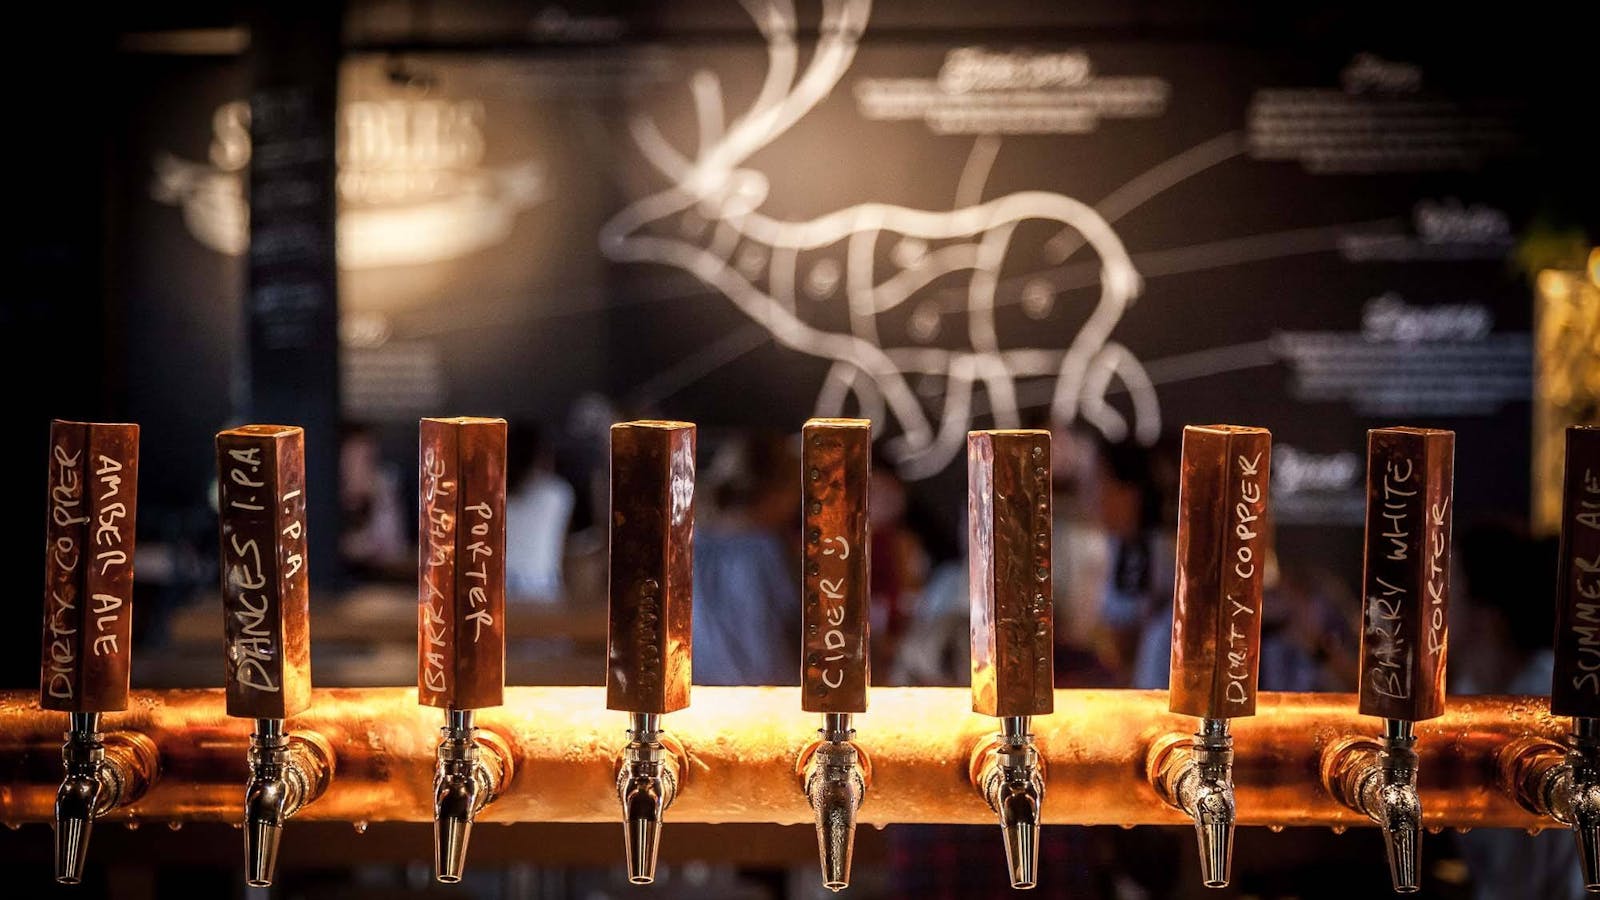 Our Tap Room offers a selection of our freshest beers and other Tasmanian beverages